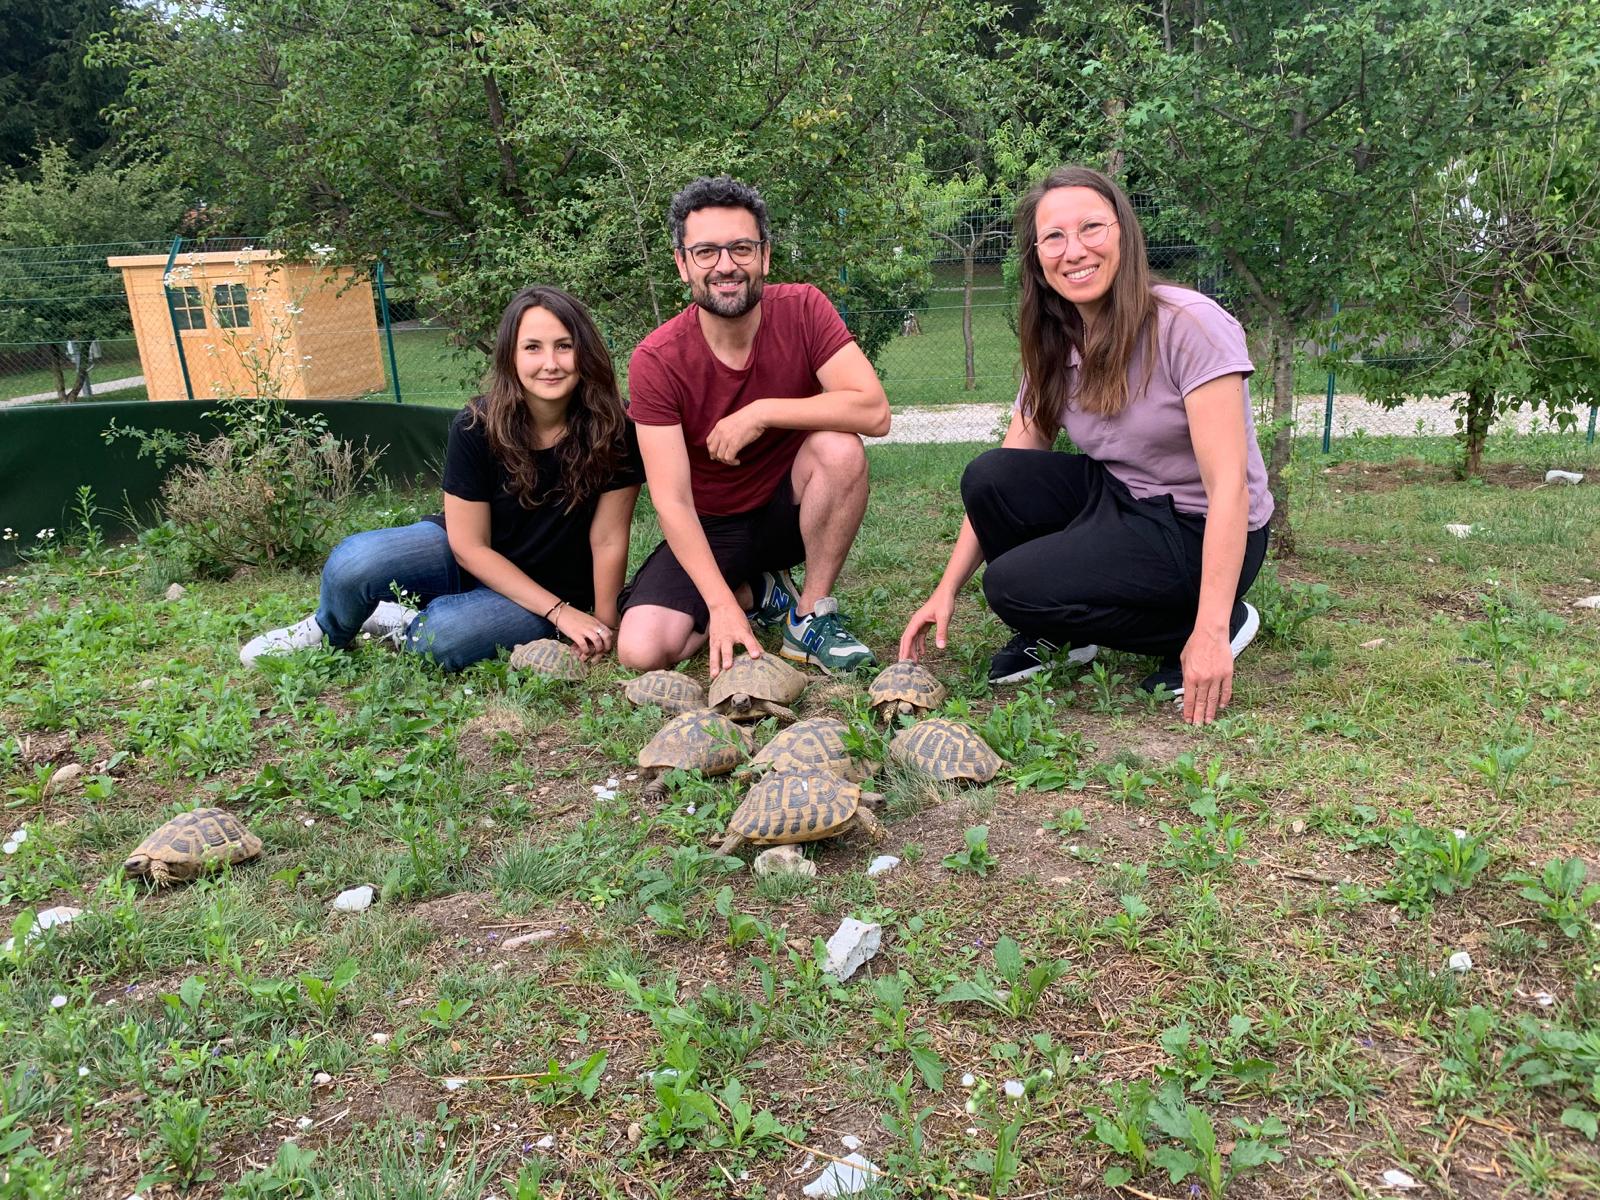 Maria Loconsole, Gionta Stancher and Elisabetta Versace with Testudo hermanni tortoises at the Speriment Area field station (Rovereto Civic Museum Foundation, Italy).